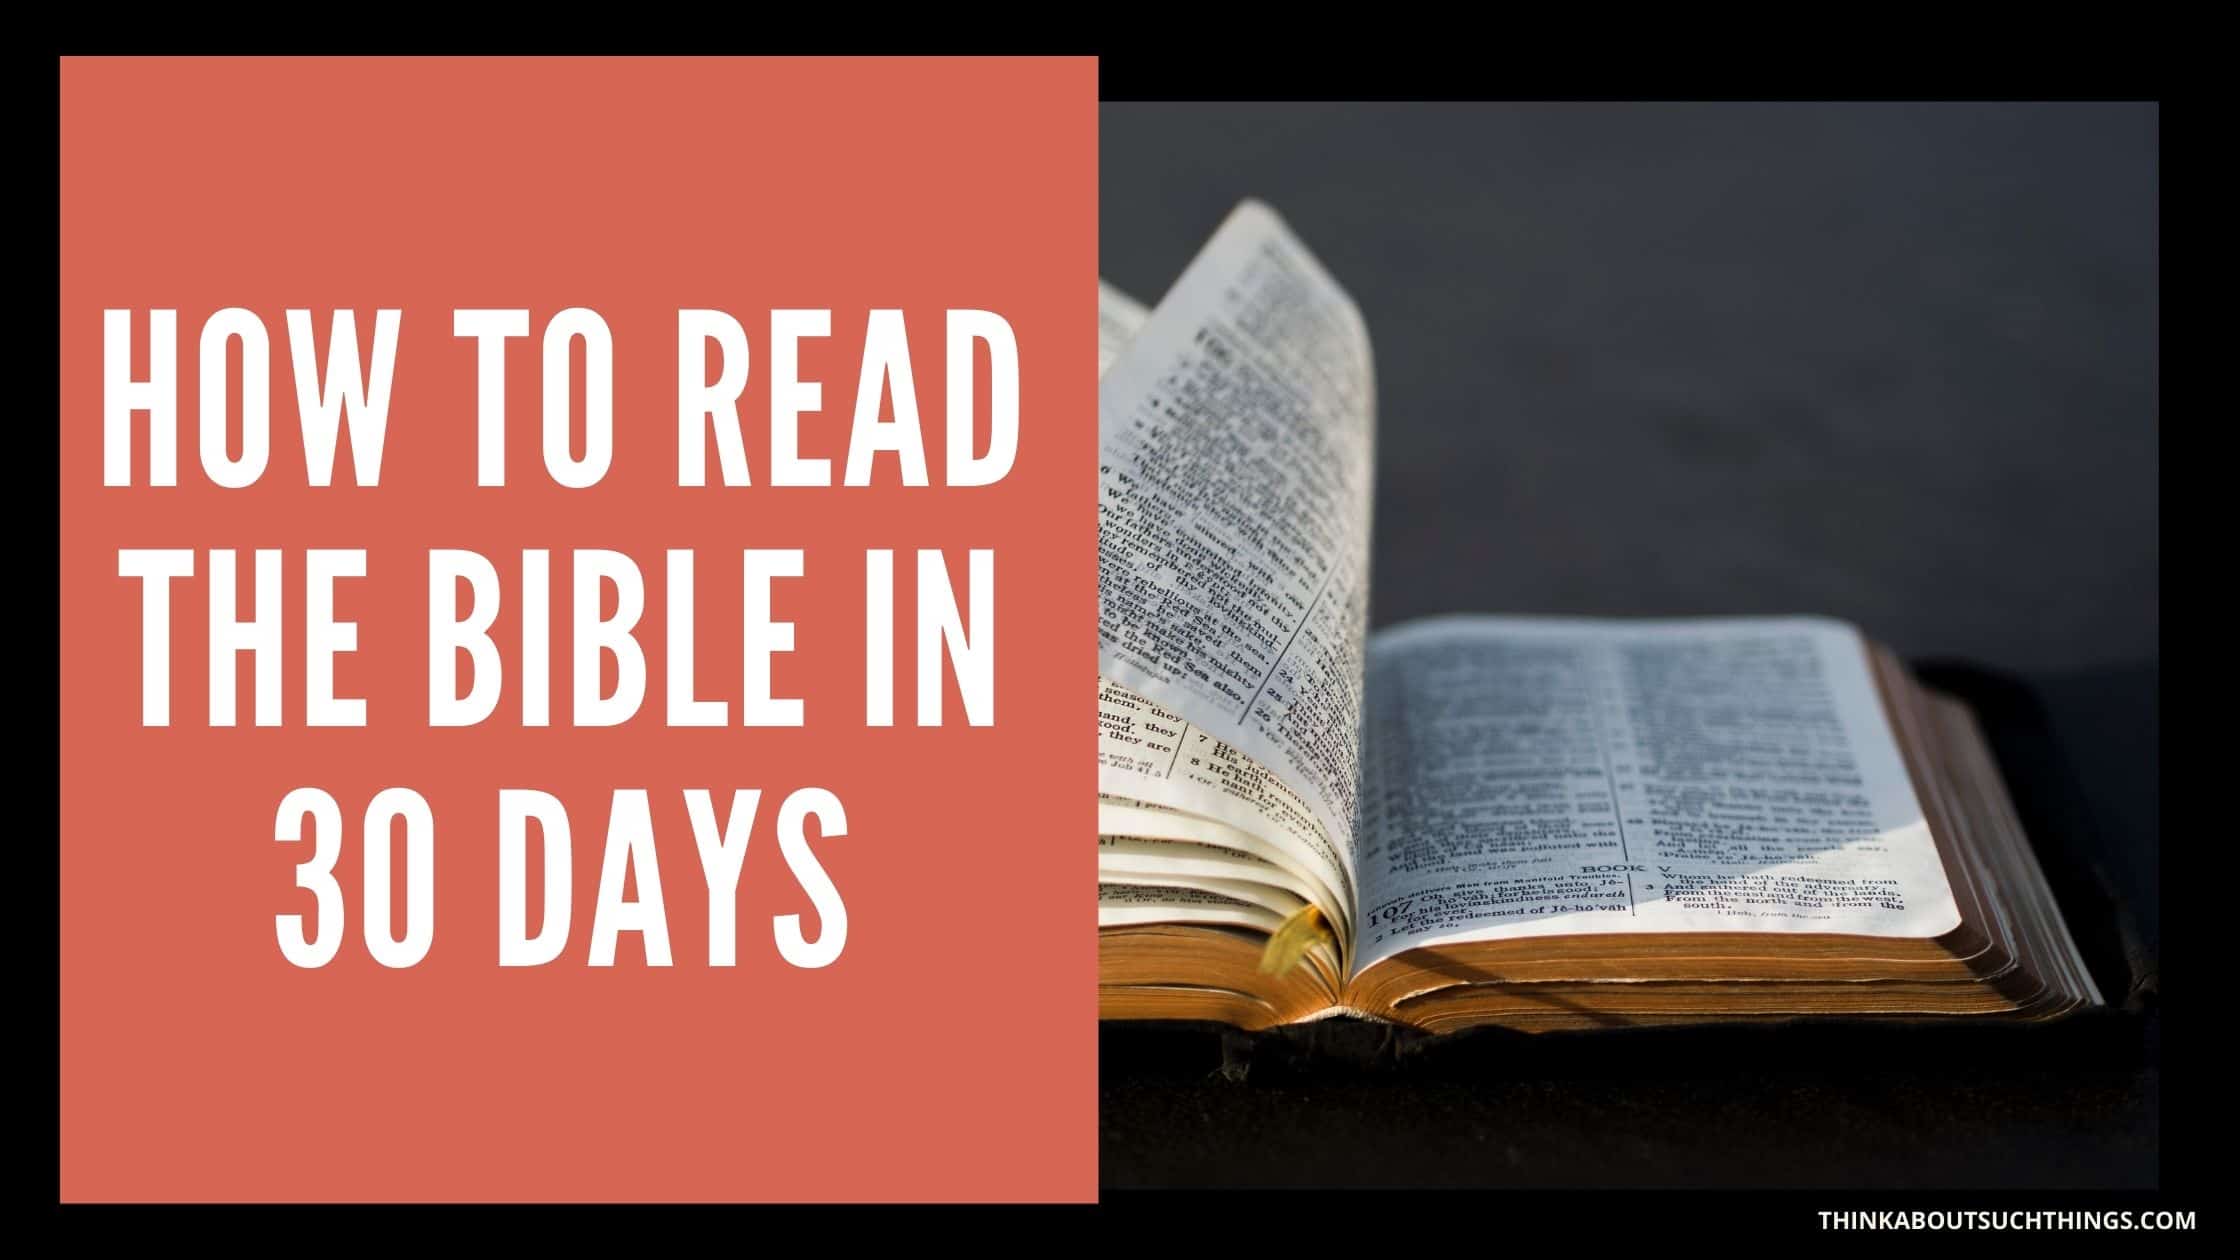 How Long Does It Take To Read The Bible? 4 Ways To Read The Entire ...